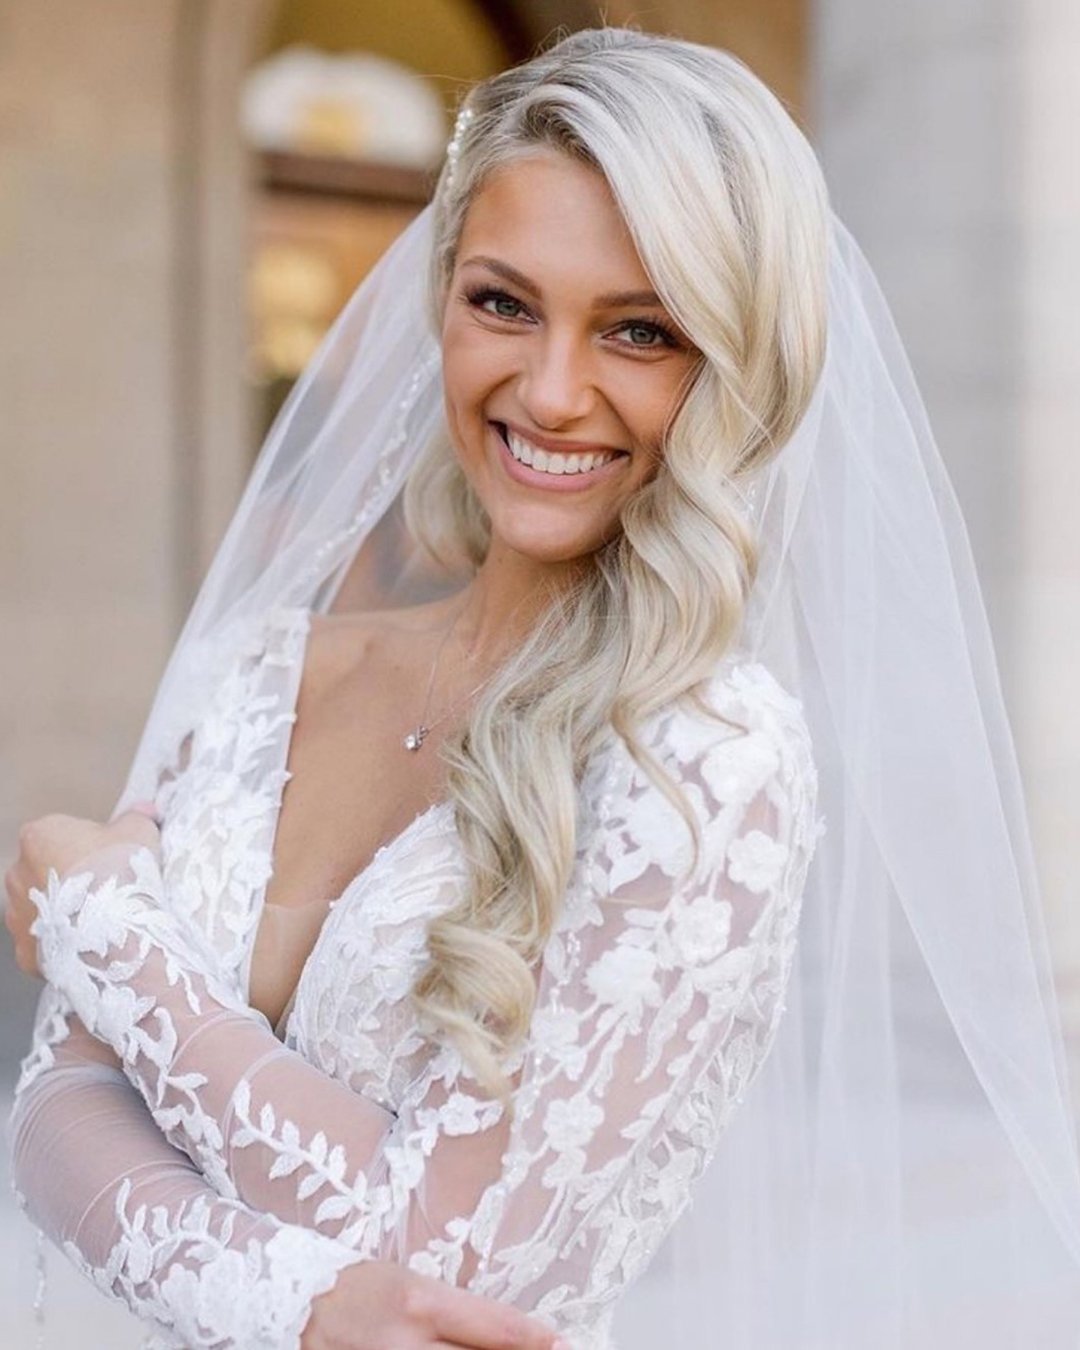 wedding hairstyles with veil side swept blonde hair down haircomesthebride